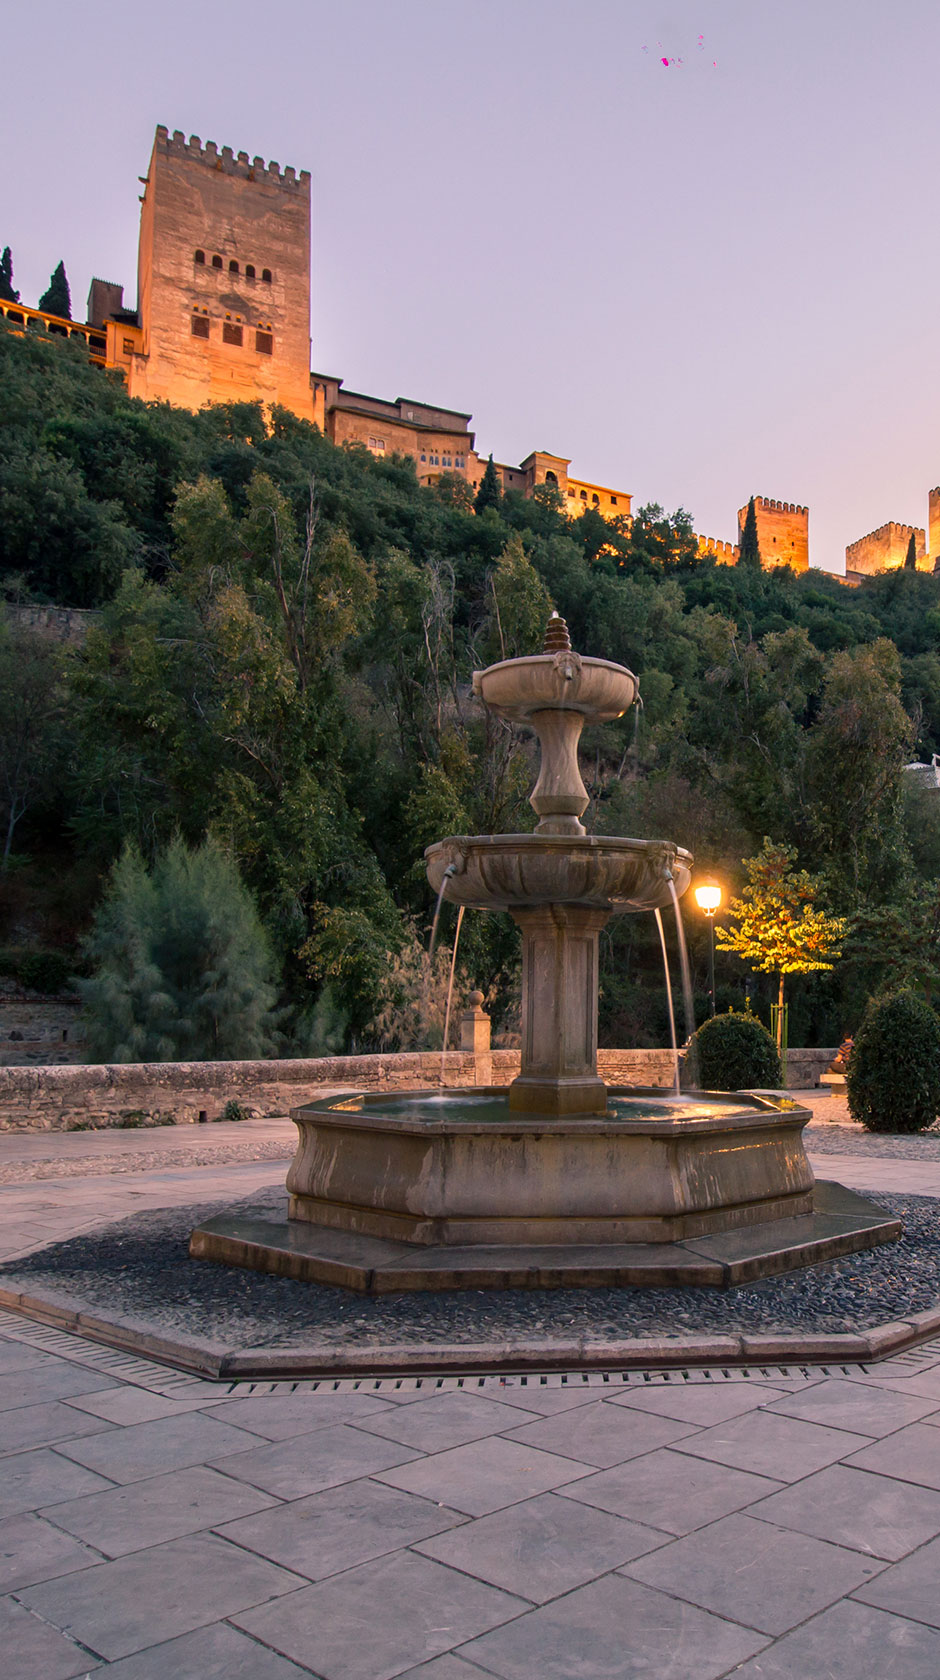 4 NIGHTS OFFER -18% DISCOUNT. PAY NOW AND SAVE FOR YOUR ACCOMMODATION IN GRANADA